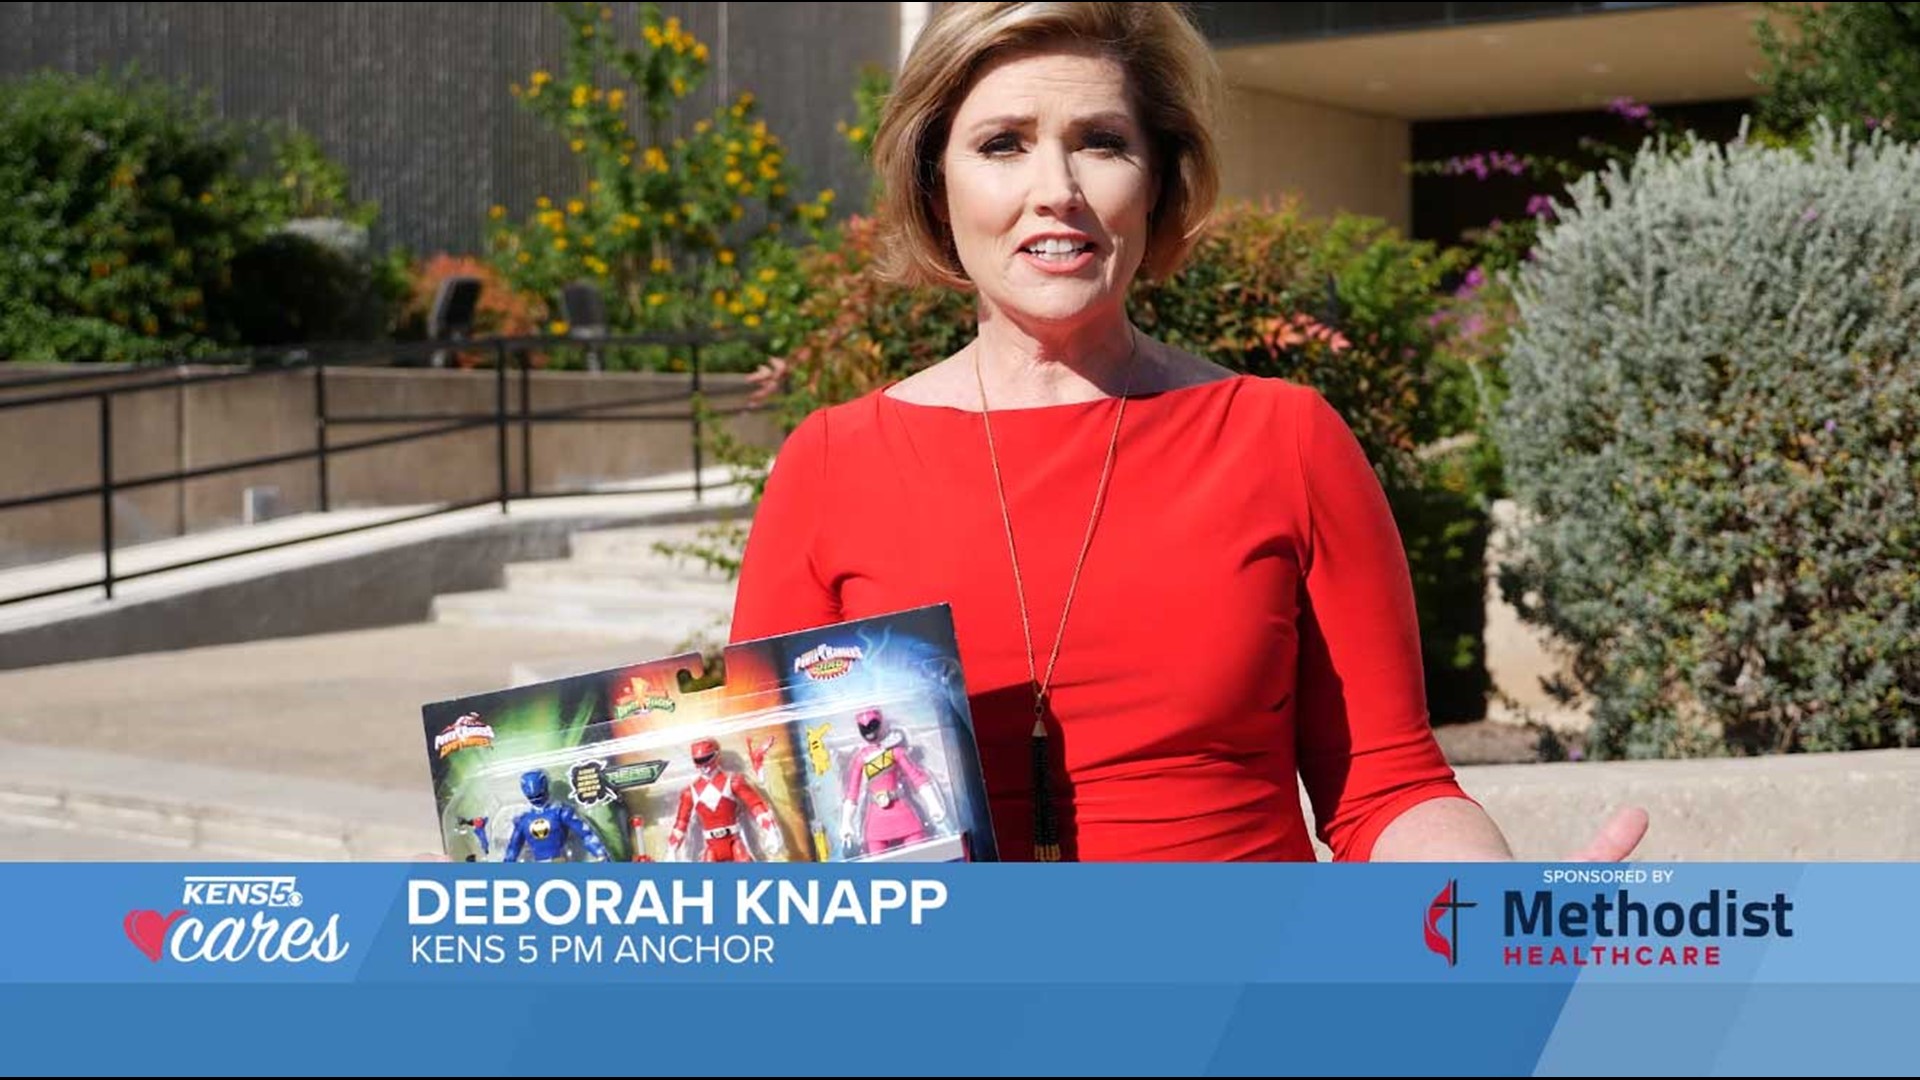 KENS 5's Deborah Knapp says her son's favorite toys were the Power Rangers! You can help create lasting memories for children in need this holiday season.